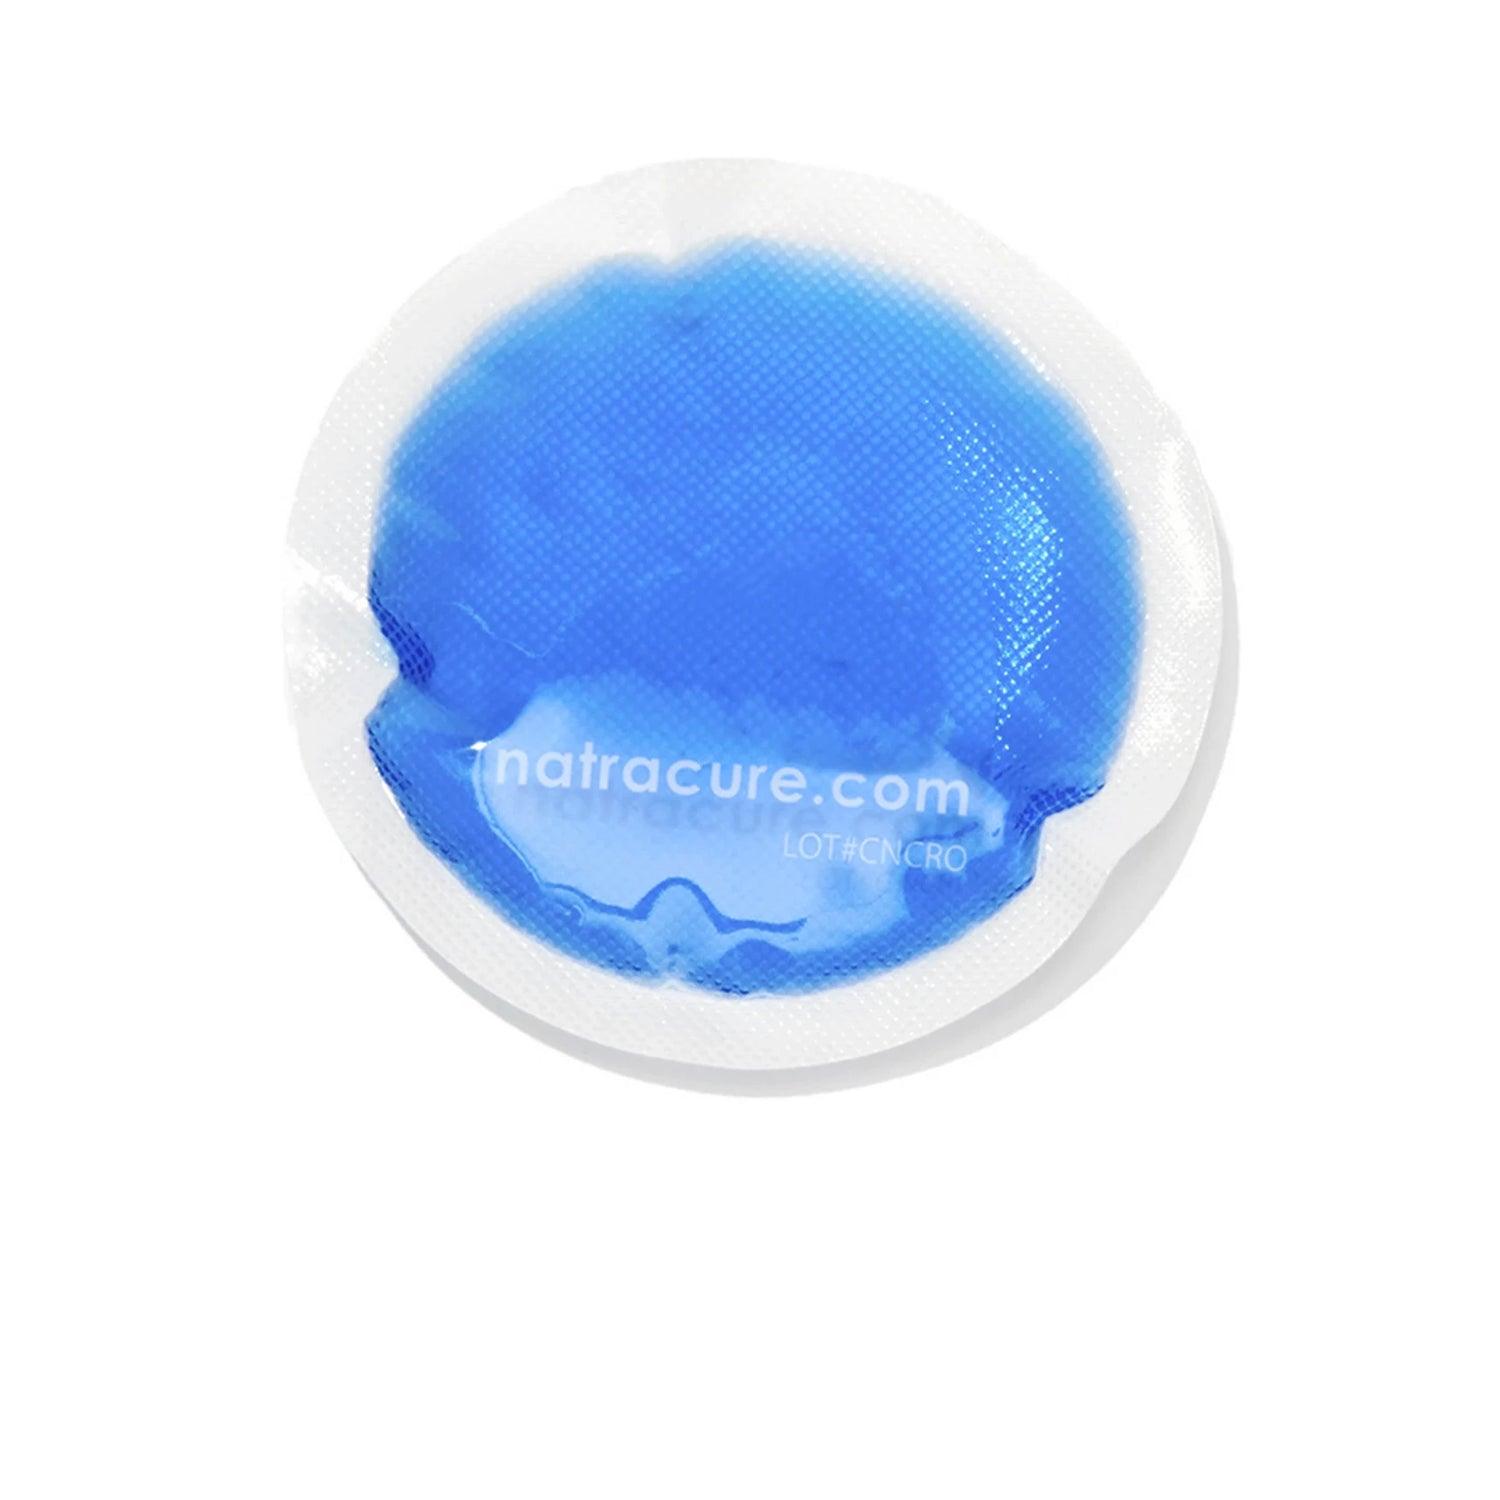 http://natracure.com/cdn/shop/products/4-circle-cold-gel-ice-packs-natracure-1.jpg?v=1710160218